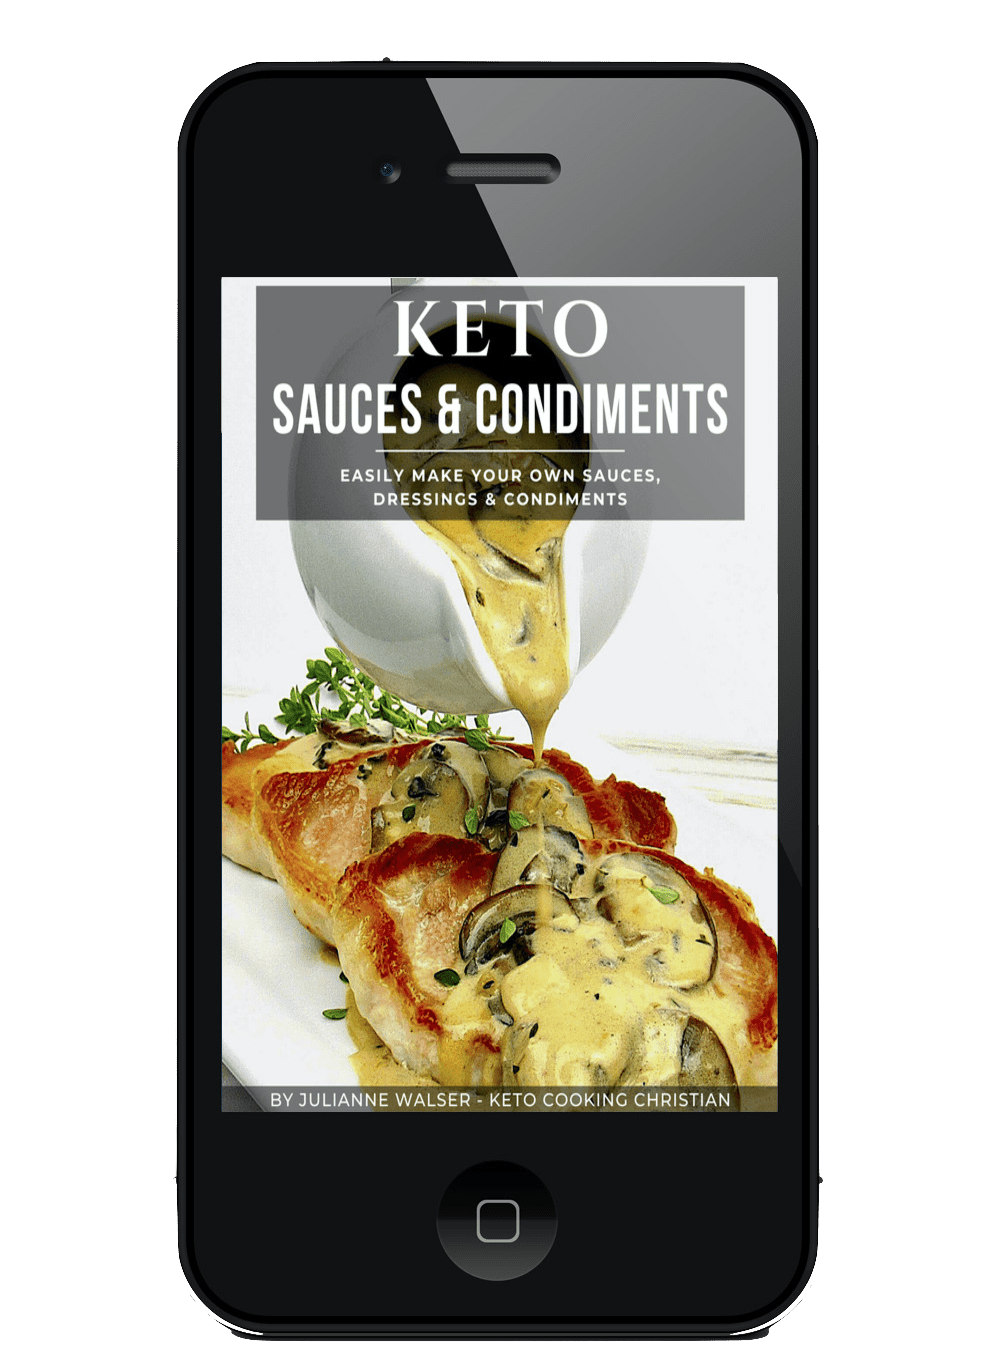 Keto Sauces and Condiments eBook on Mobile device